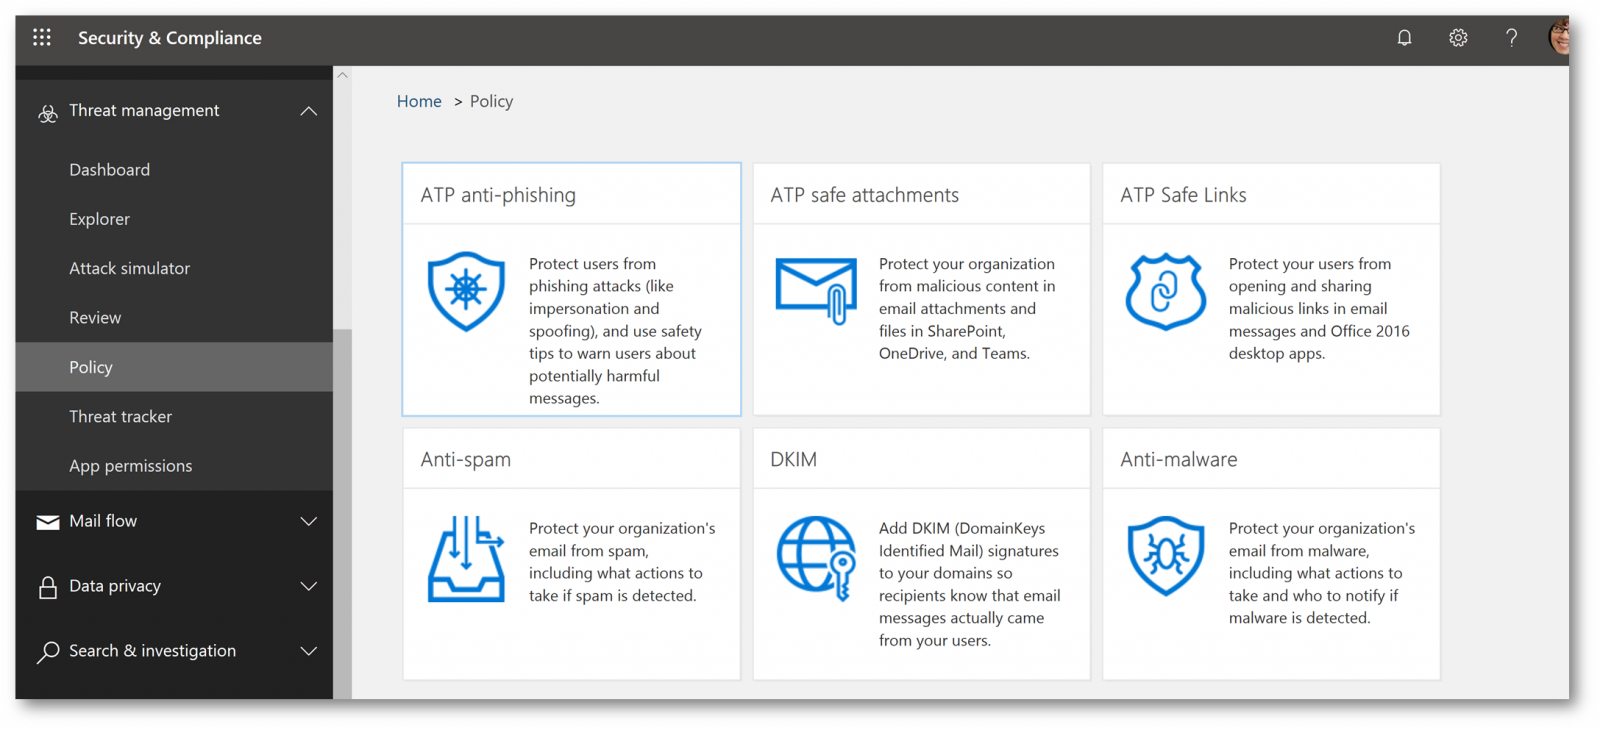 Microsoft to Extend Office 365 ATP Safe Links to Office Online